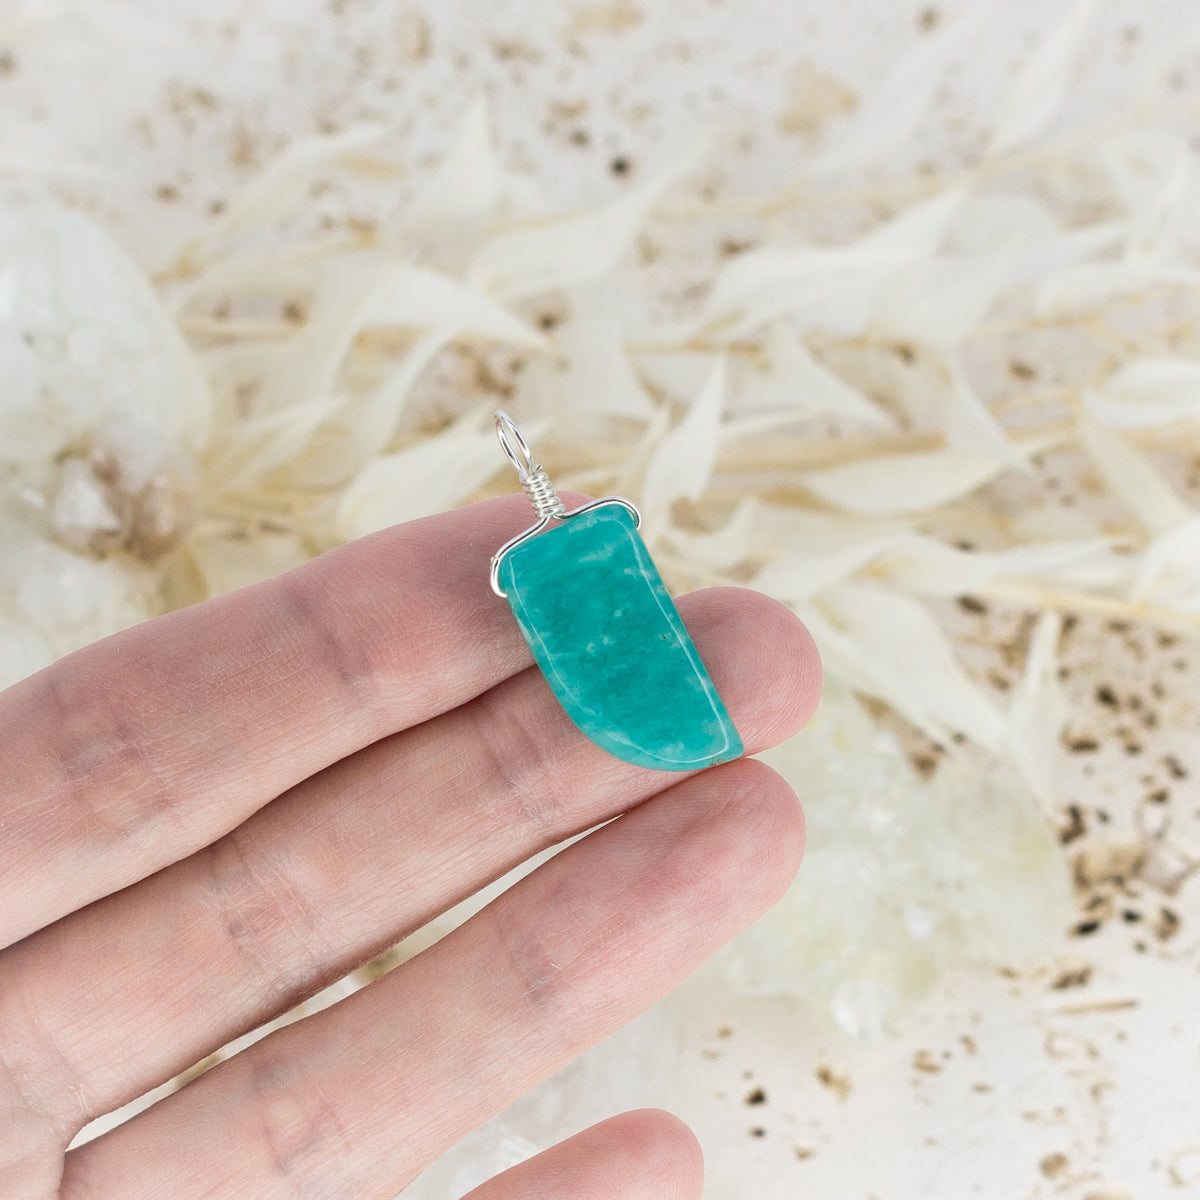 Small Smooth Amazonite Crystal Pendant with Gentle Point